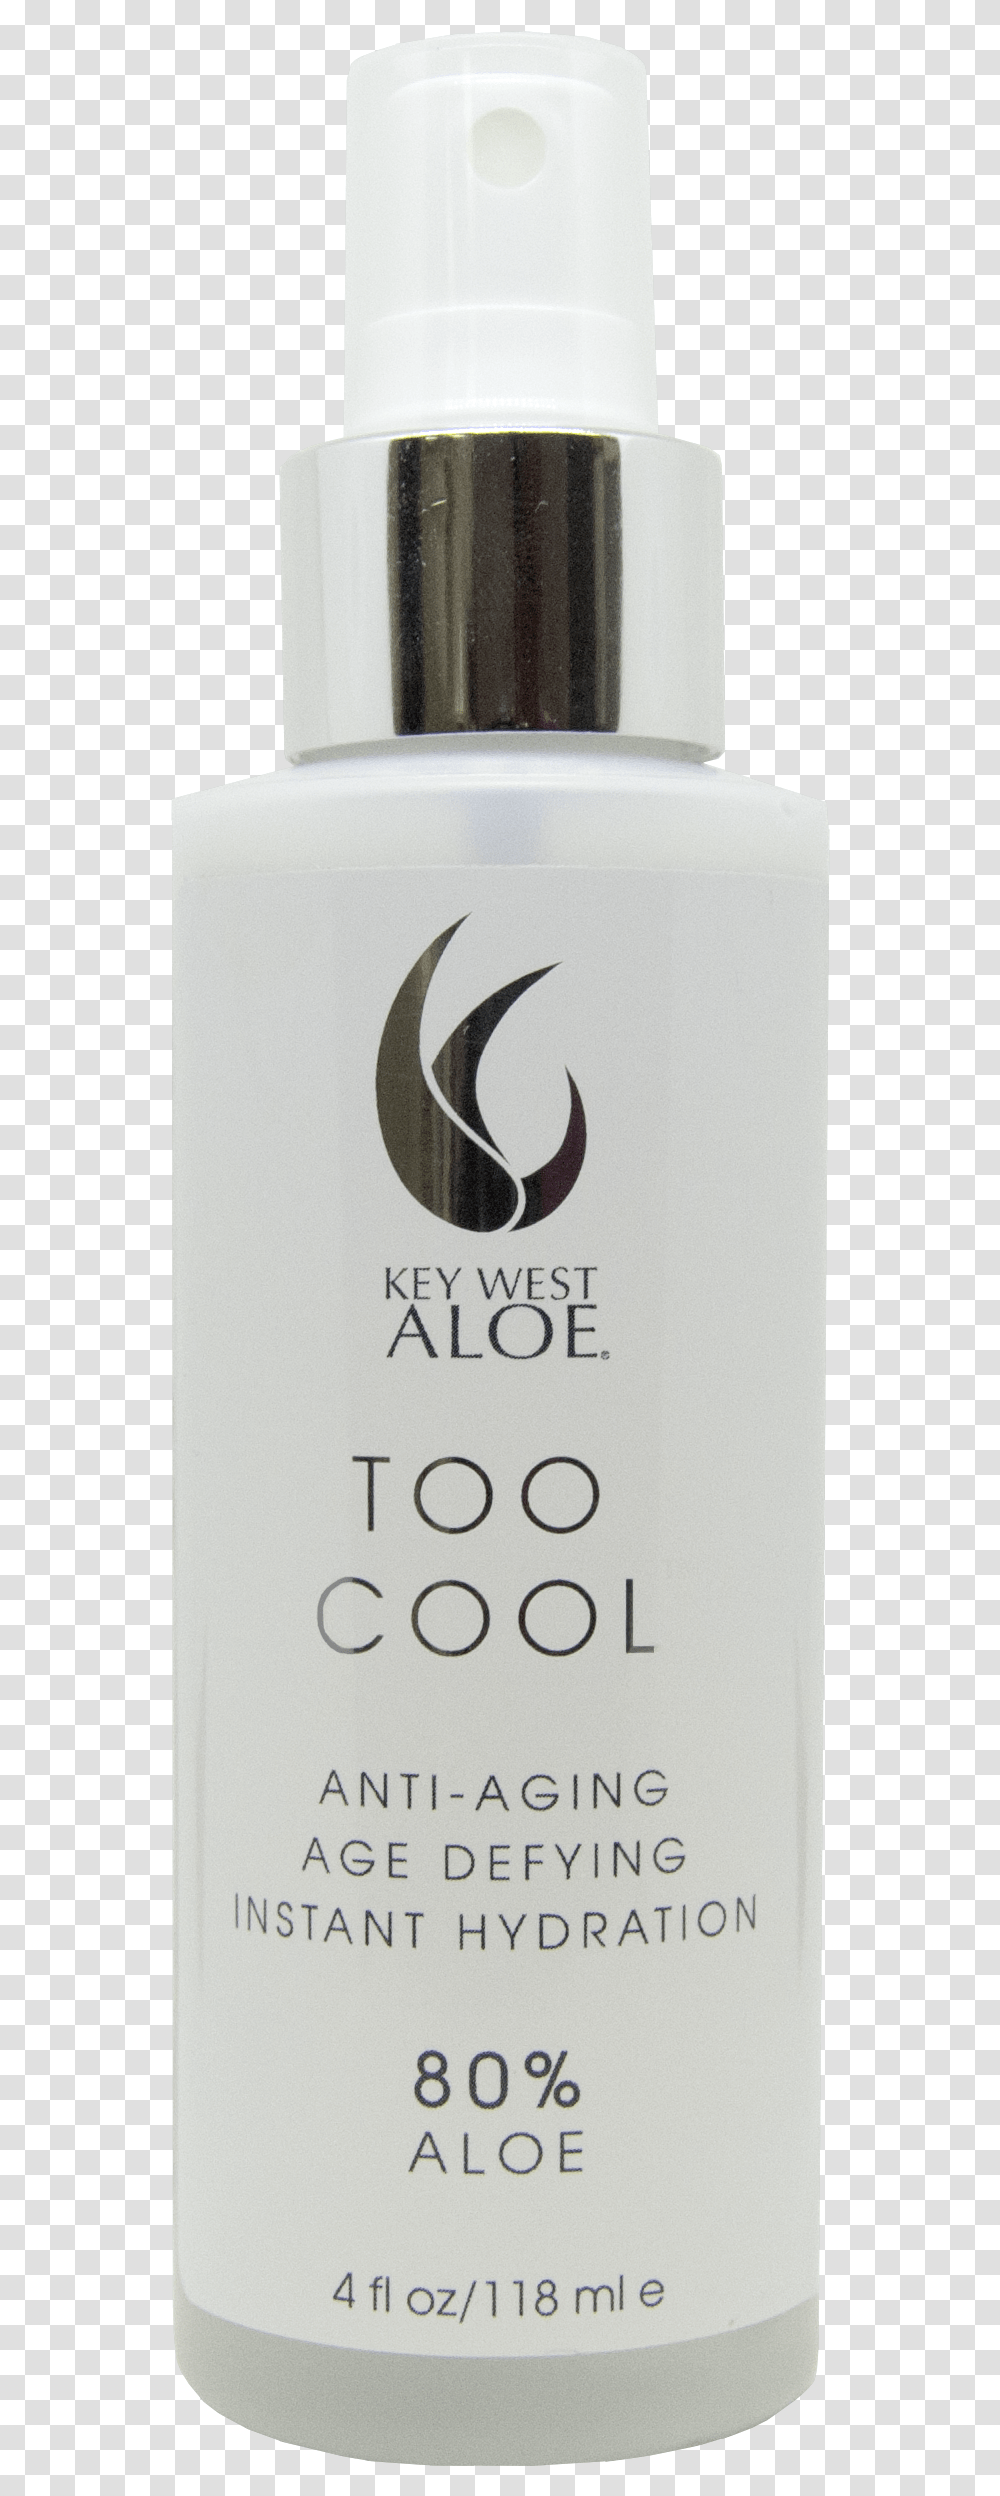 Too Cool From Key West Aloe Cosmetics, Alphabet, Beverage, Tin Transparent Png